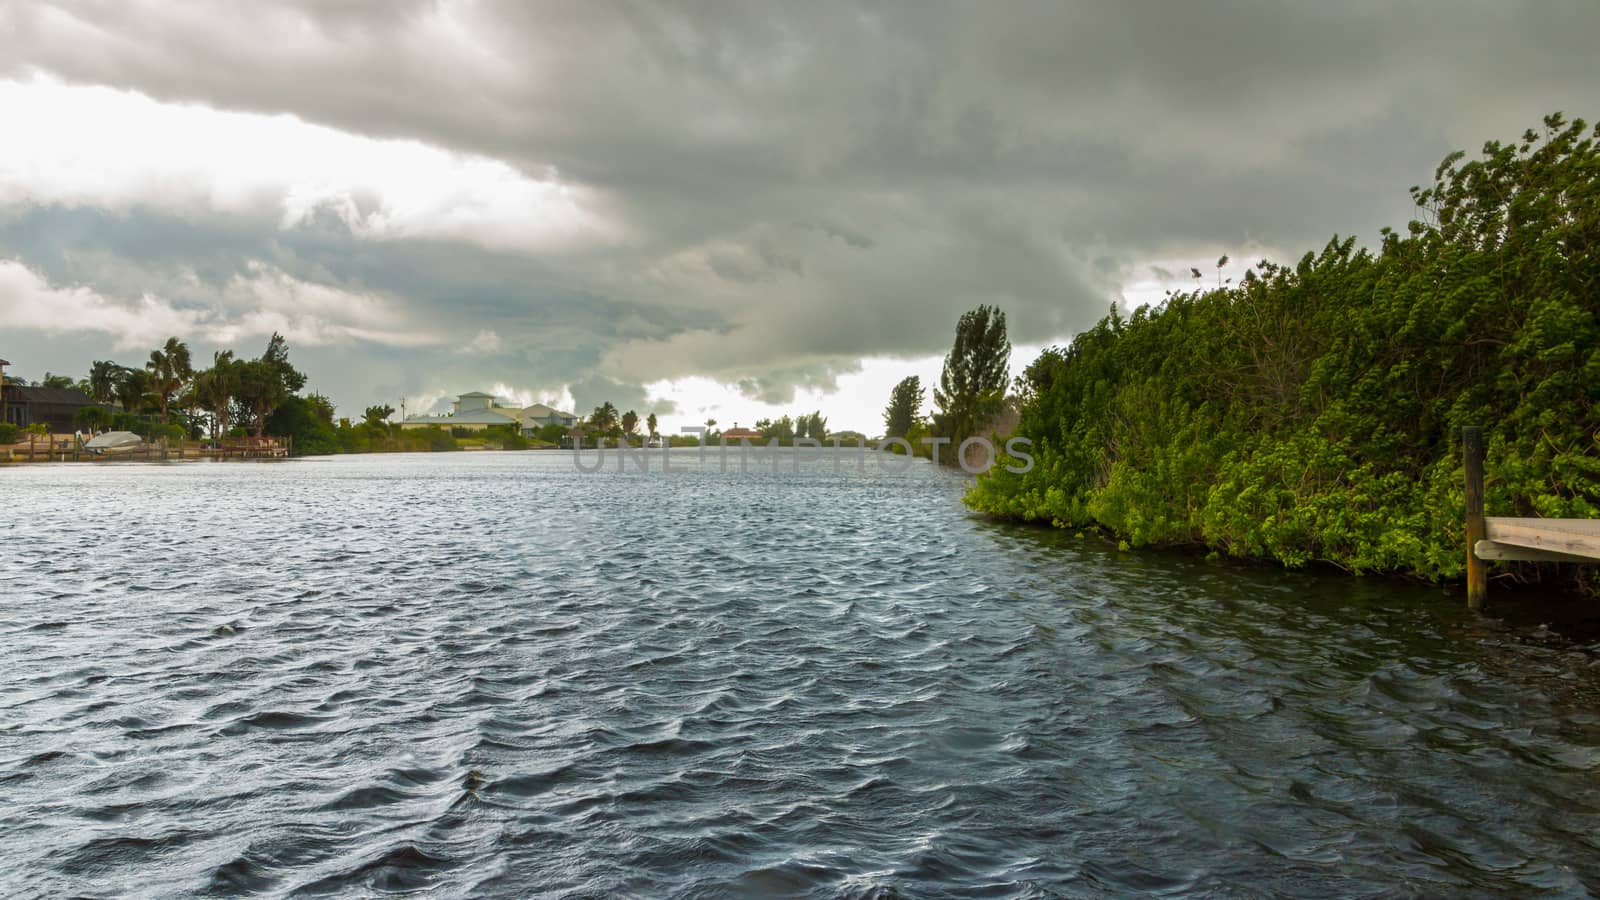 Dark clouds hovering over the water before a heavy storm in Cape Coral, Florida